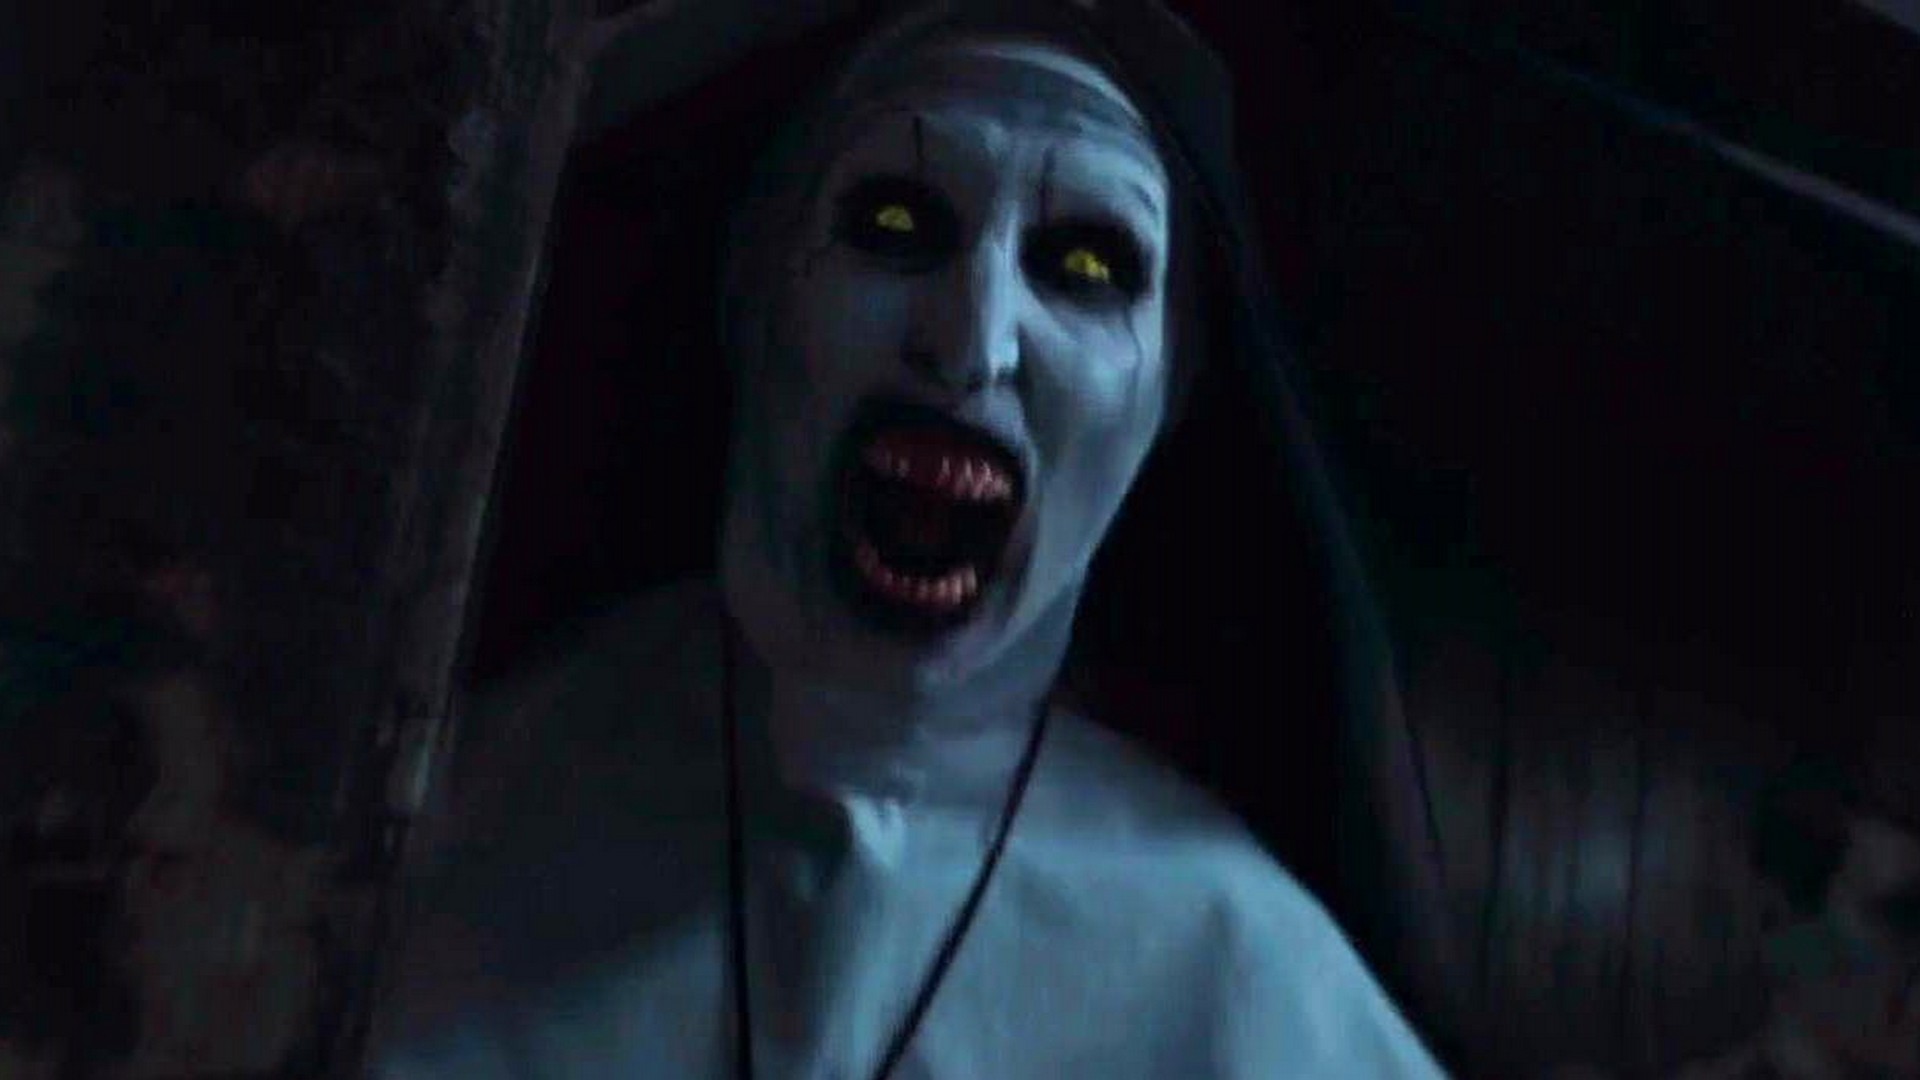 The Nun Wallpaper HD with image resolution 1920x1080 pixel. You can make this wallpaper for your Desktop Computer Backgrounds, Mac Wallpapers, Android Lock screen or iPhone Screensavers